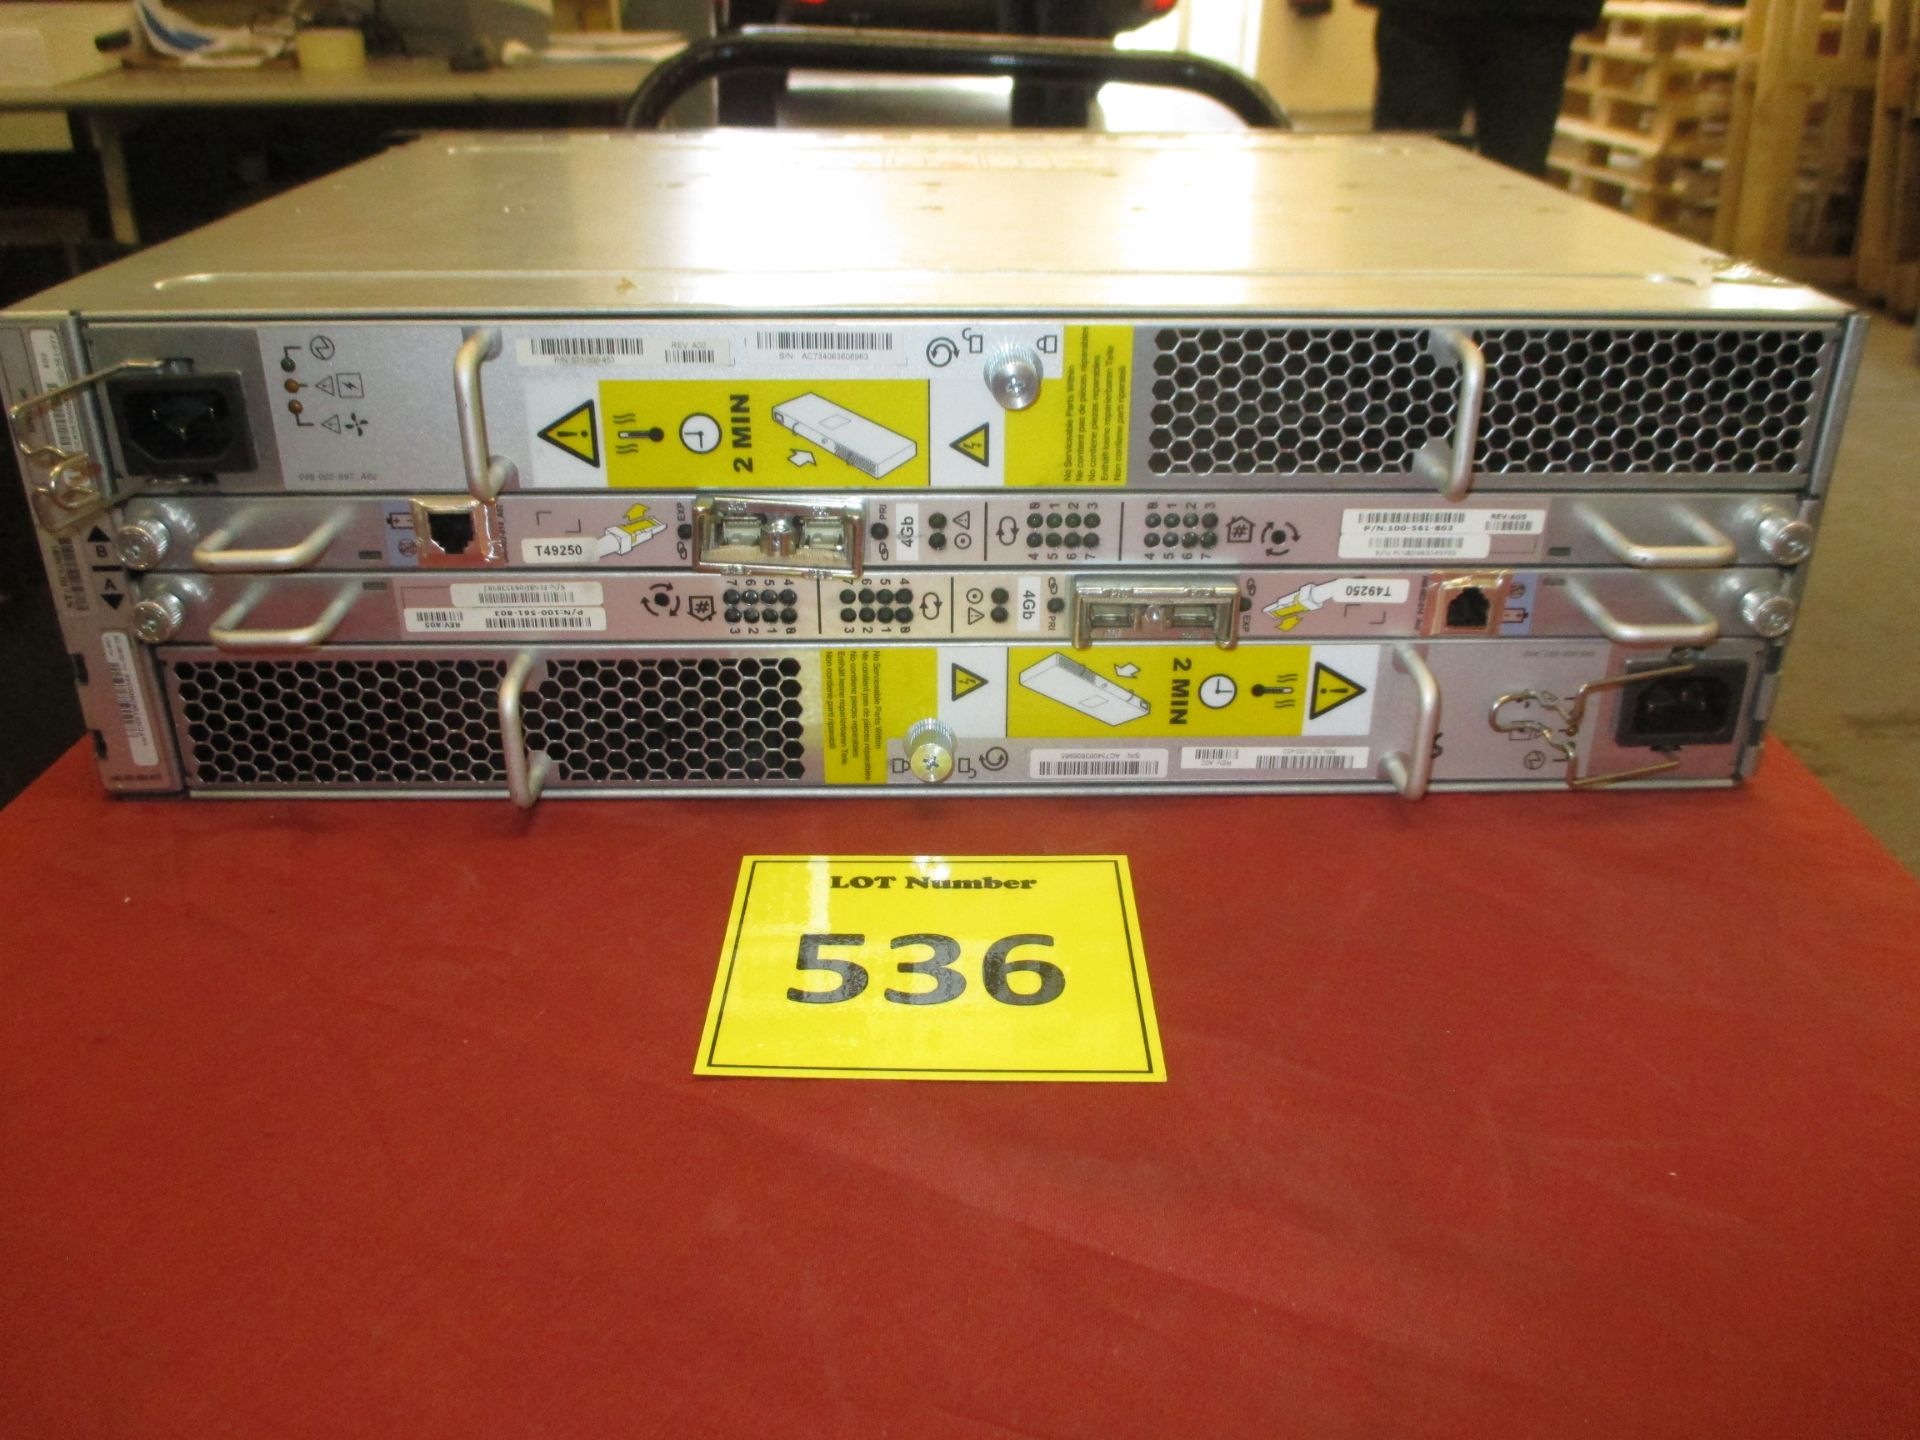 Dell EMC Drive array KTN-STL4 - 2 x 4GB Controllers Fibre Channel FC & 2 x PSU. COMPLETE WITH - Image 3 of 3